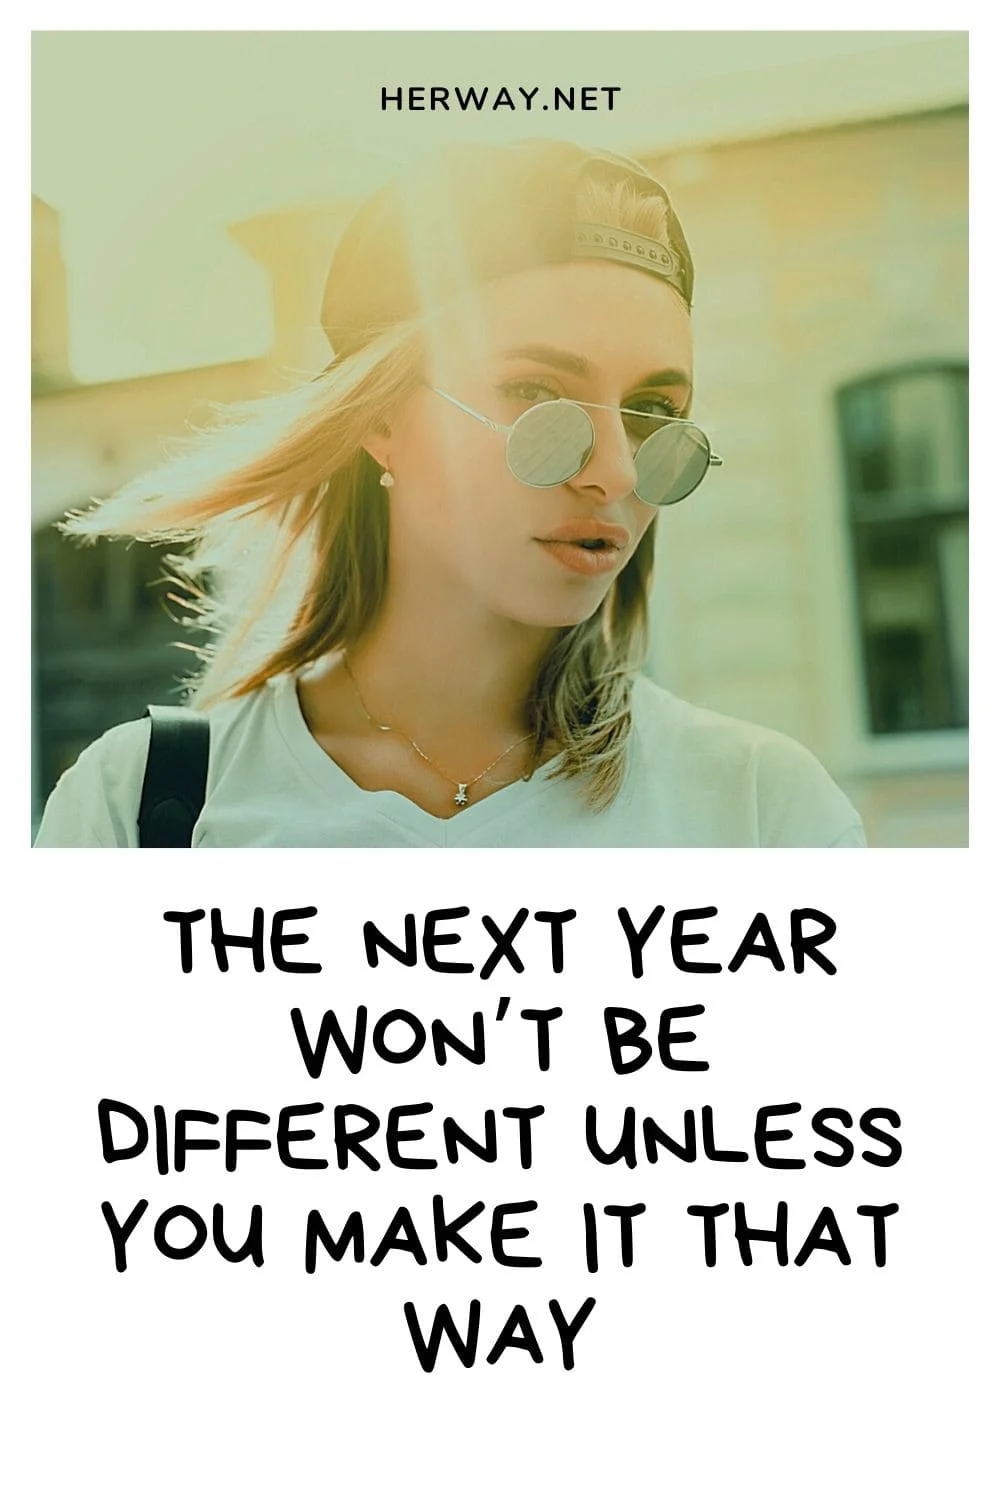 The Next Year Won’t Be Different Unless You Make It That Way